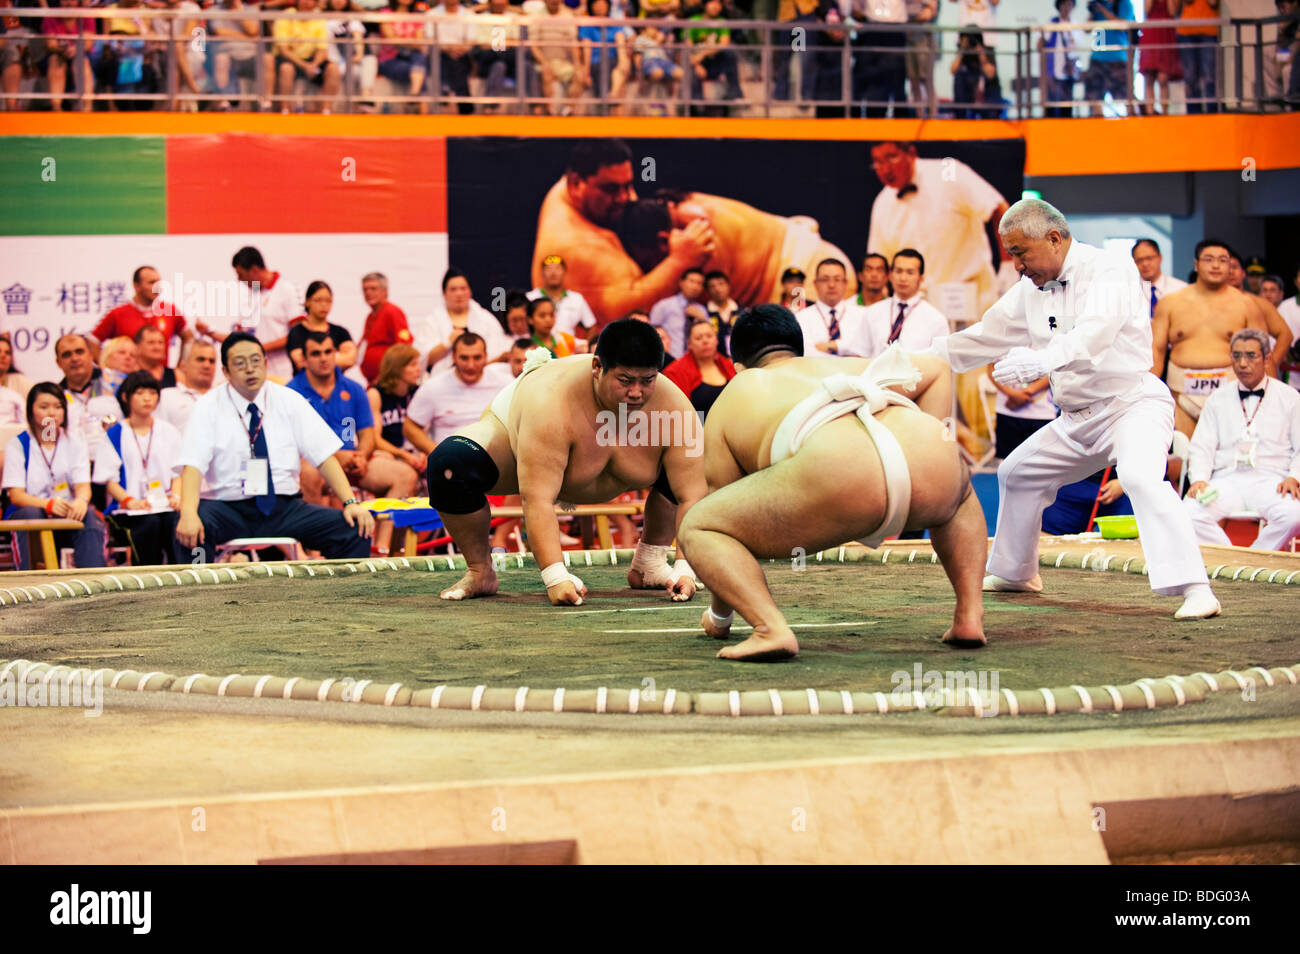 Sumo Wrestling, World Games, Kaohsiung, Taiwan, July 18, 2009 Stock Photo